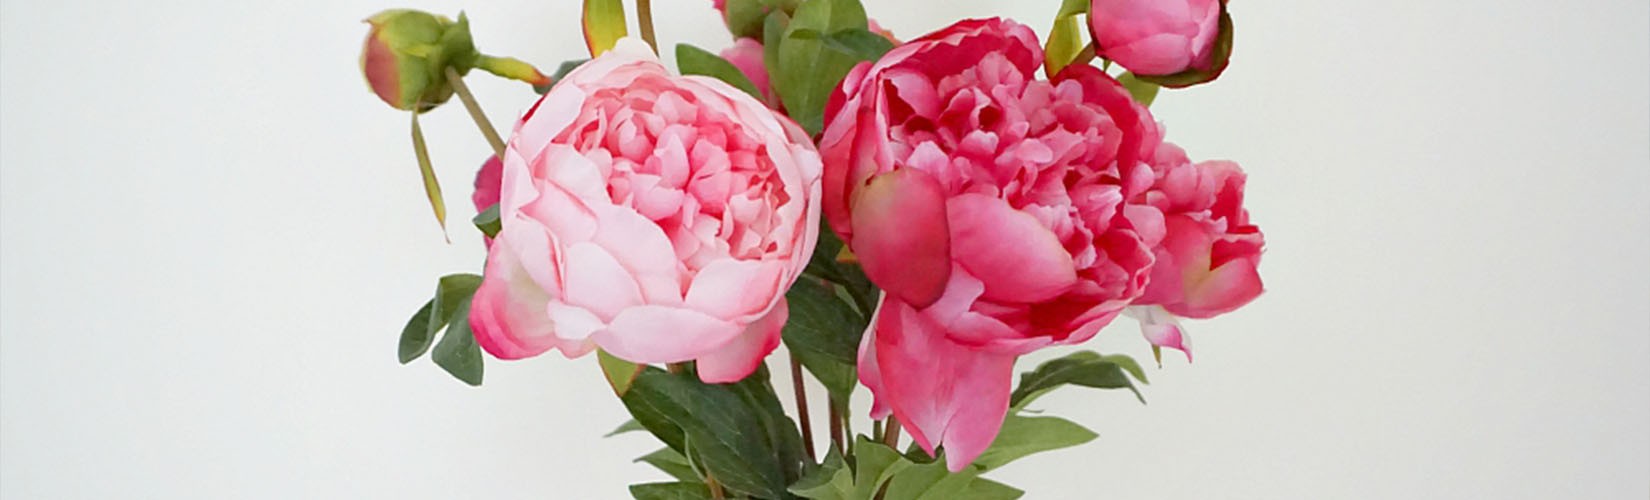 Our Guide To The Best Spring Summer Flowers 2019